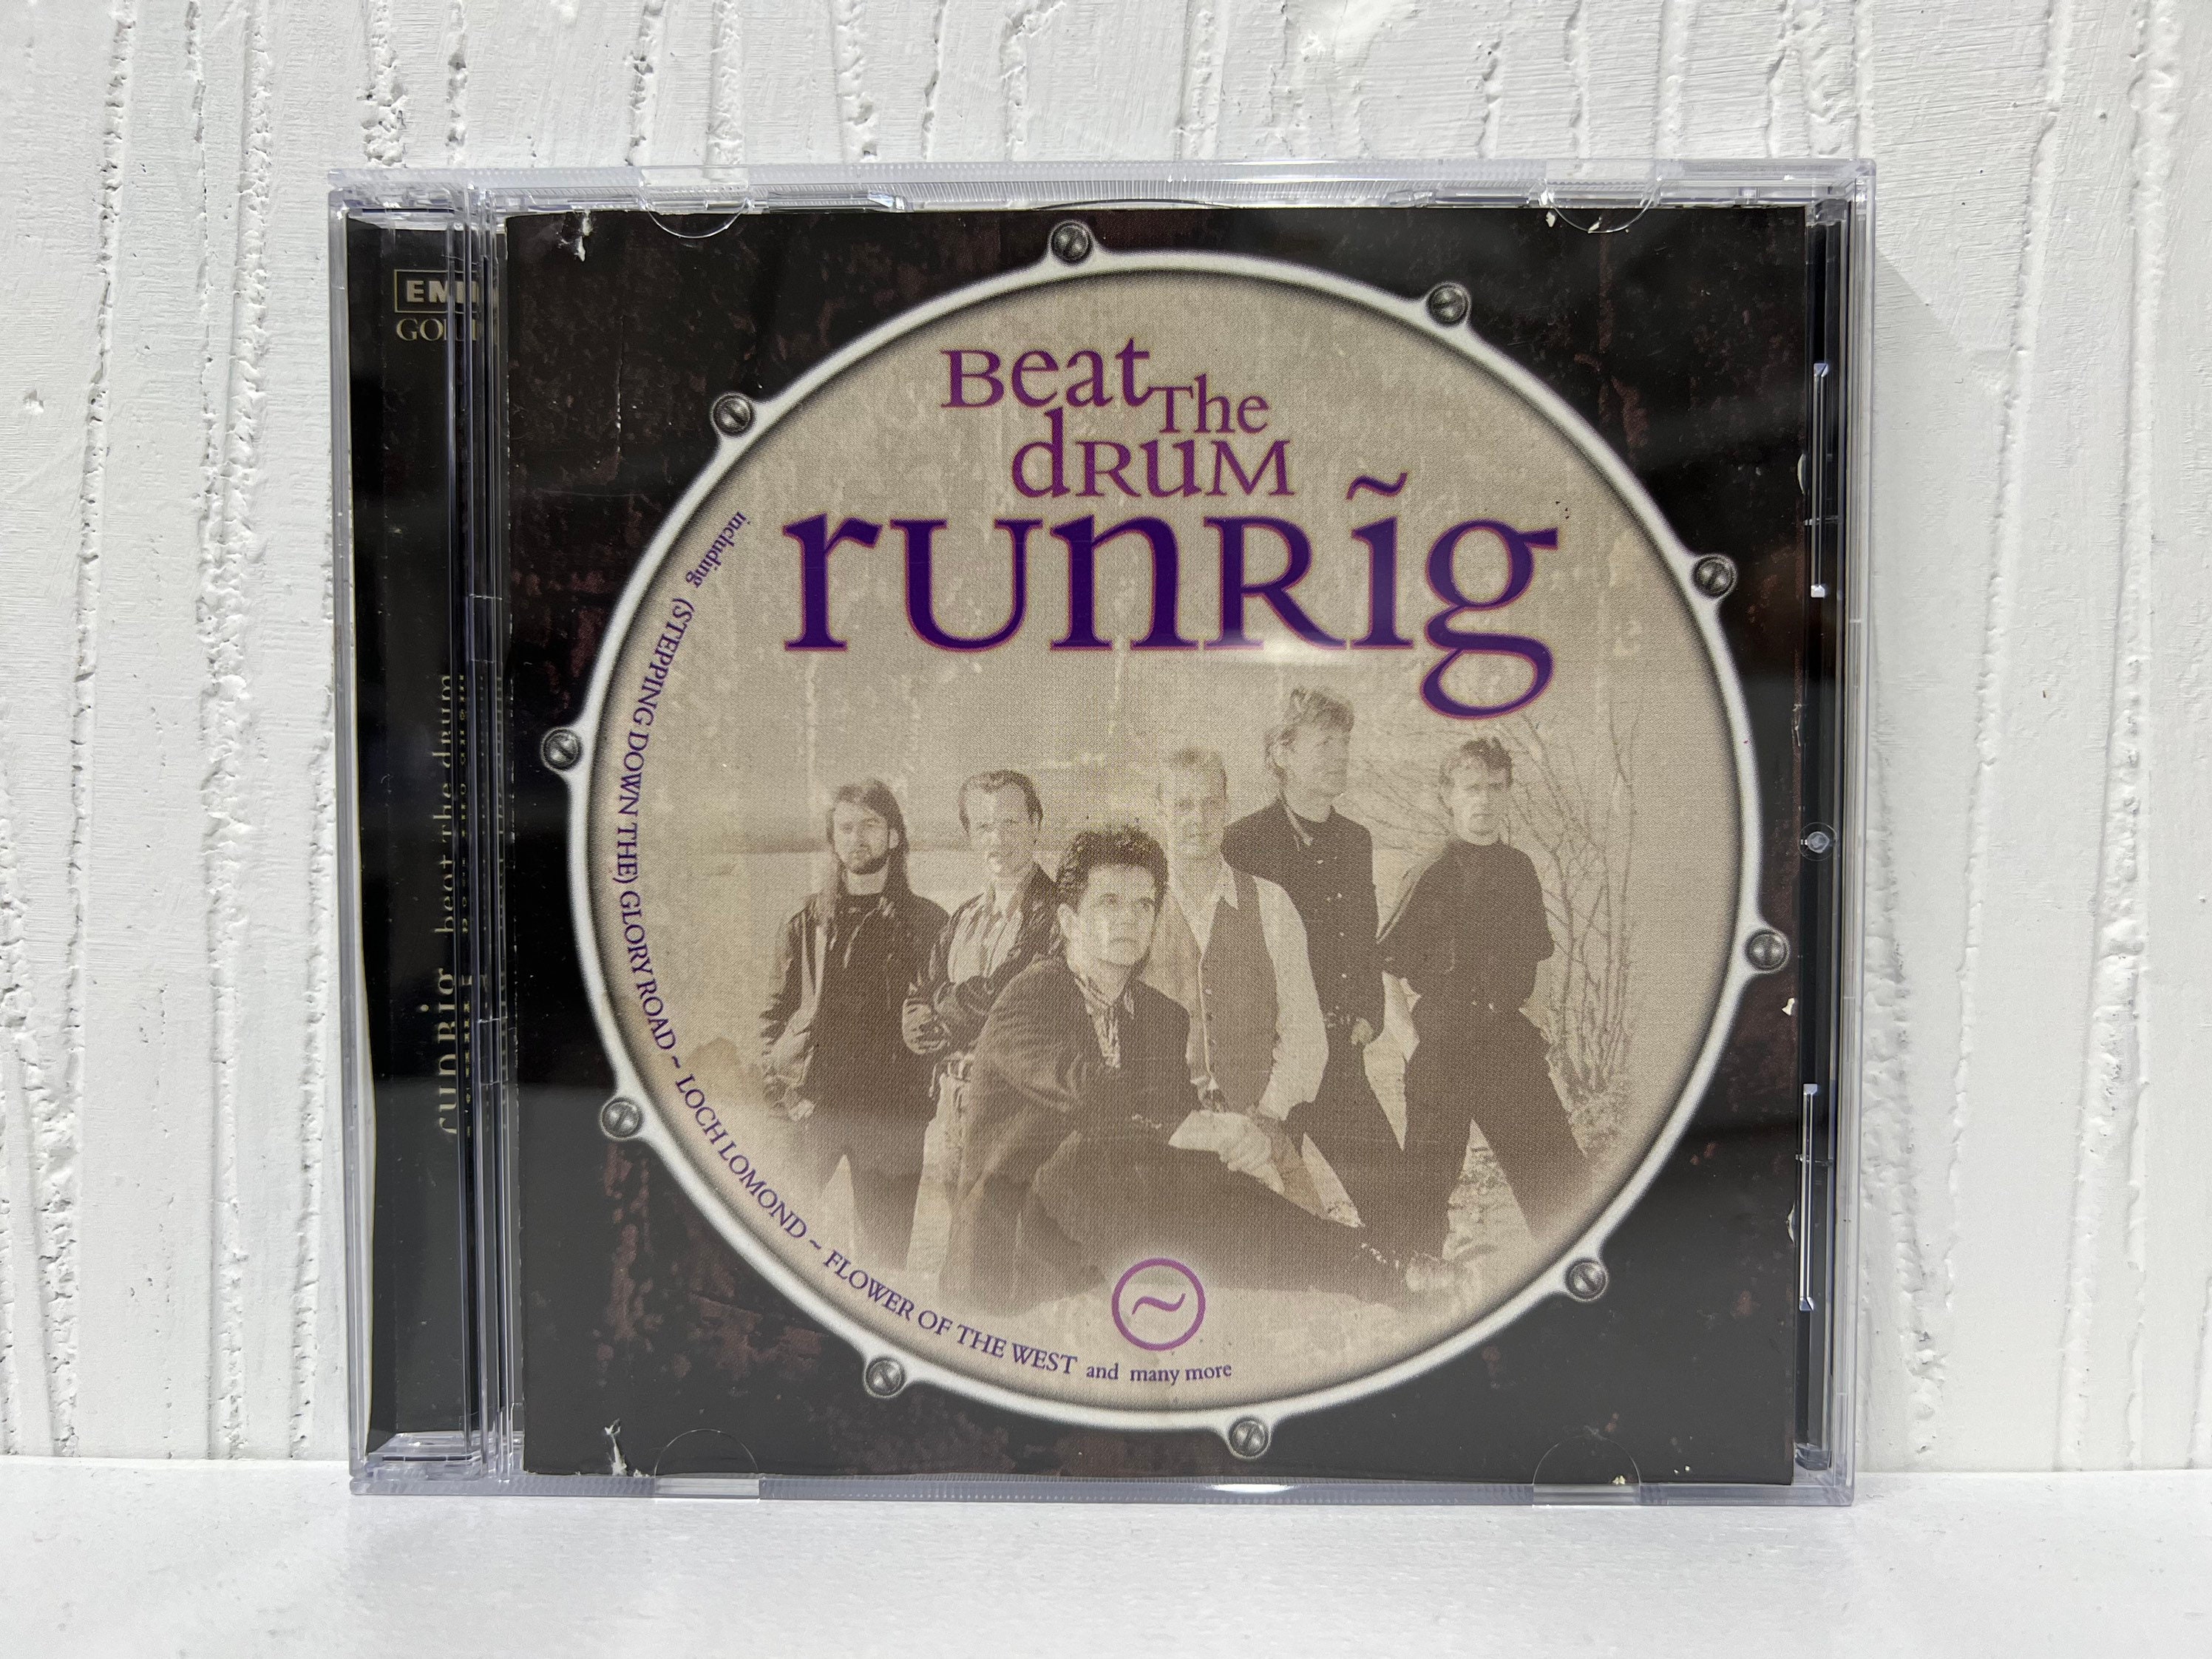 Runrig CD Collection Album the Drum Rock Gifts - Etsy